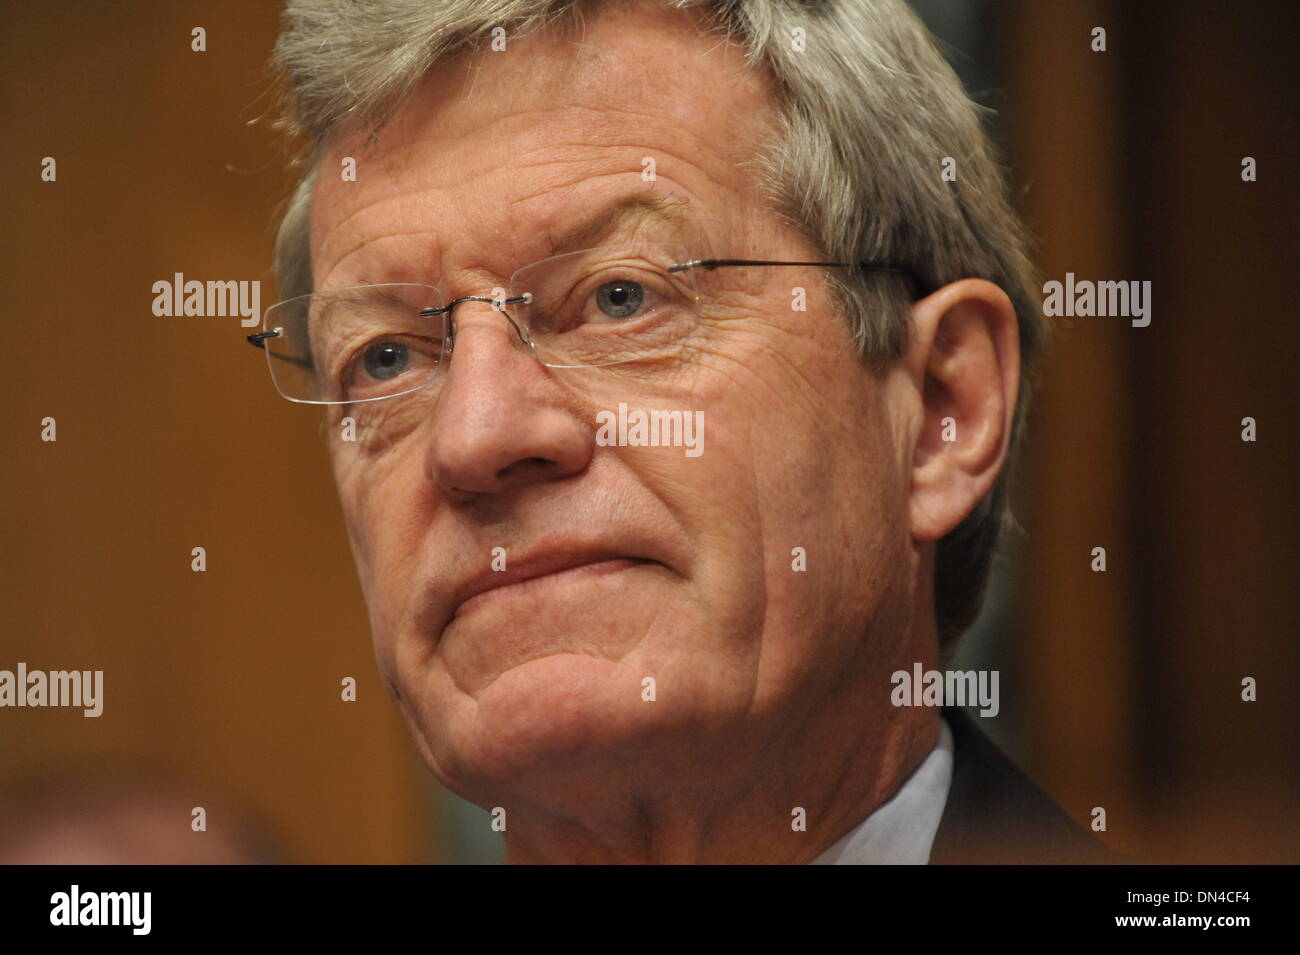 18, 2013 - President Barack Obama is expected to appoint Senate Finance Committee Chairman Max Baucus as ambassador to China. - dec-18-2013-president-barack-obama-is-expected-to-appoint-senate-finance-DN4CF4